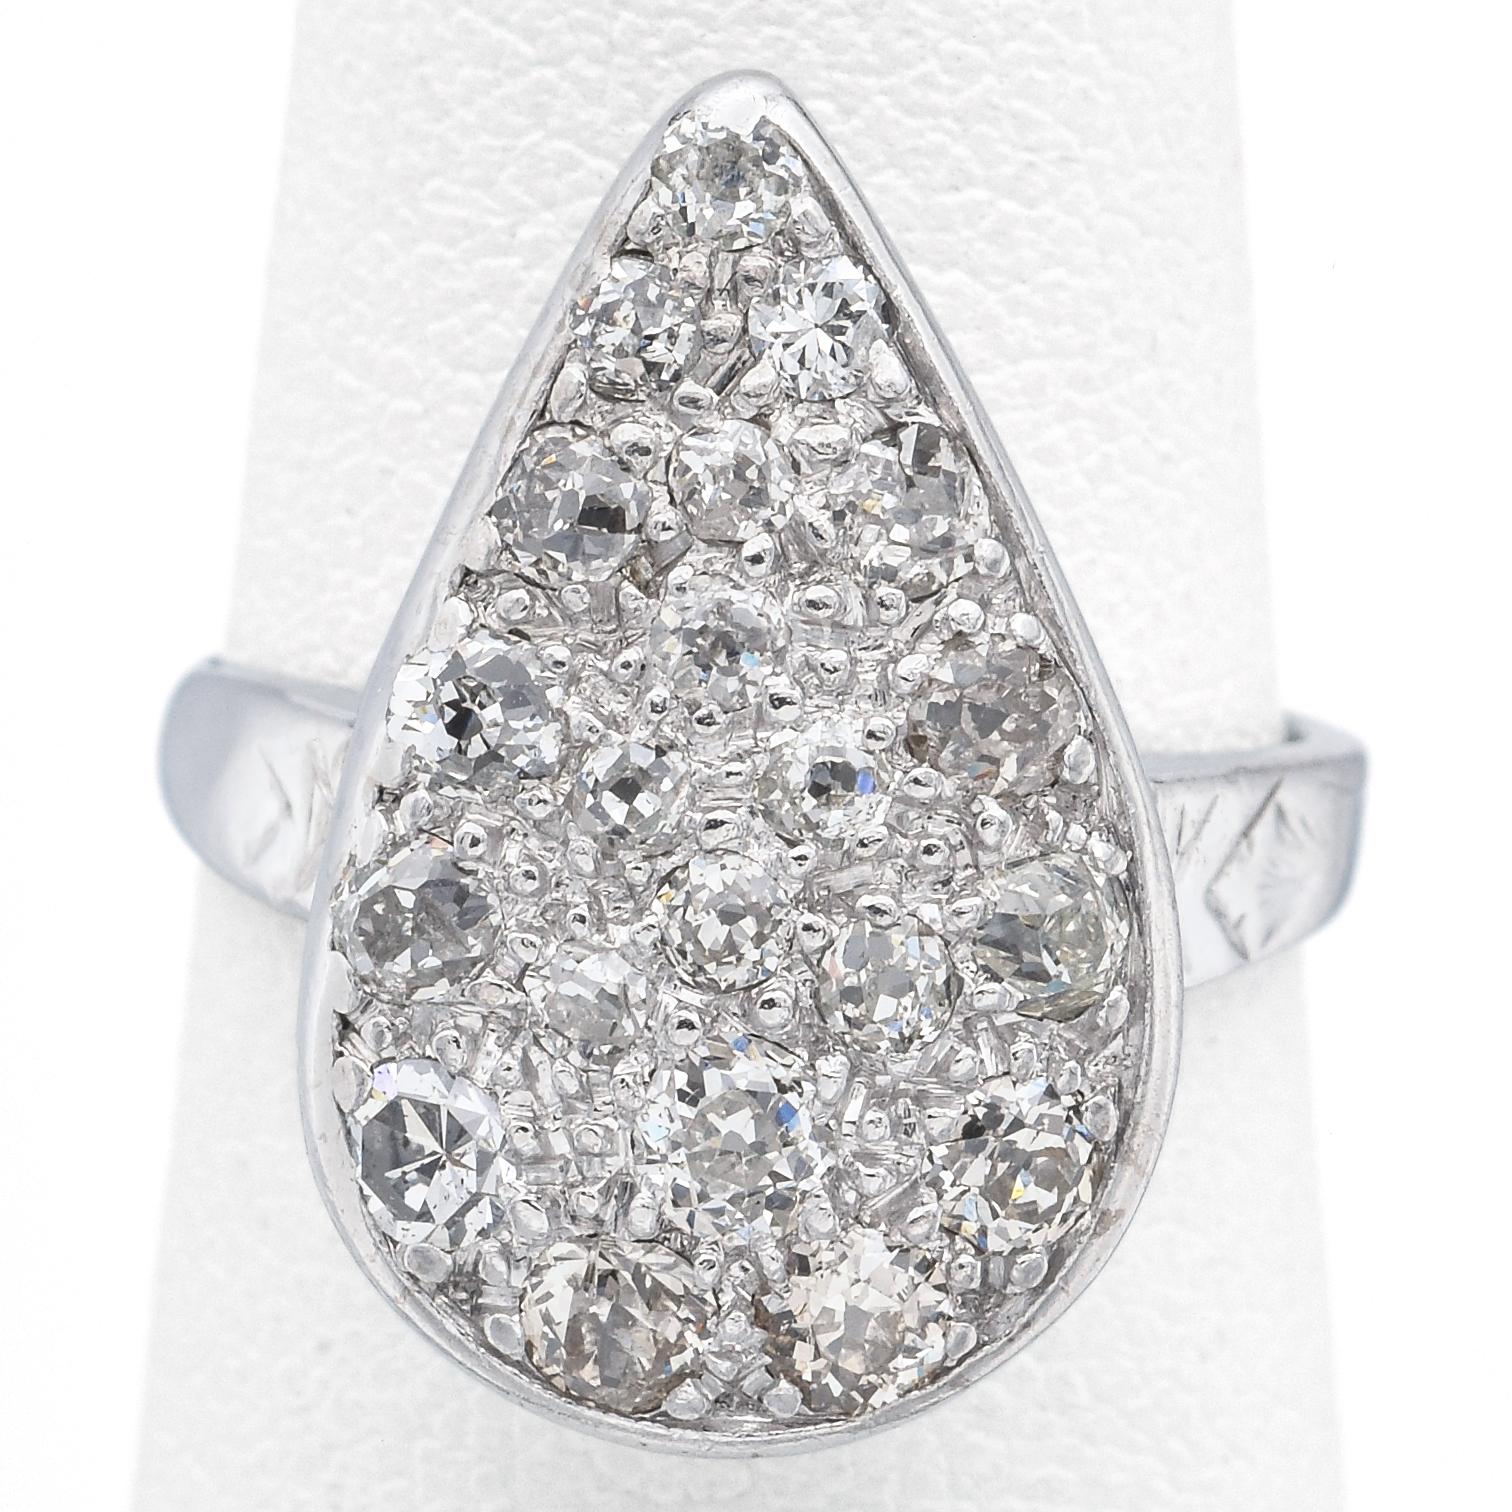 Weight: 4.7 Grams
Stone: Approx 1.02 TCW (0.02-0.14 ct) Old Mine Cut Diamonds
Face of Ring: 19.0 x 12.0 x 6.2 mm
Ring Size: 4
Hallmark: 14K & Platinum Tested

ITEM #:BR-1054-091923-15